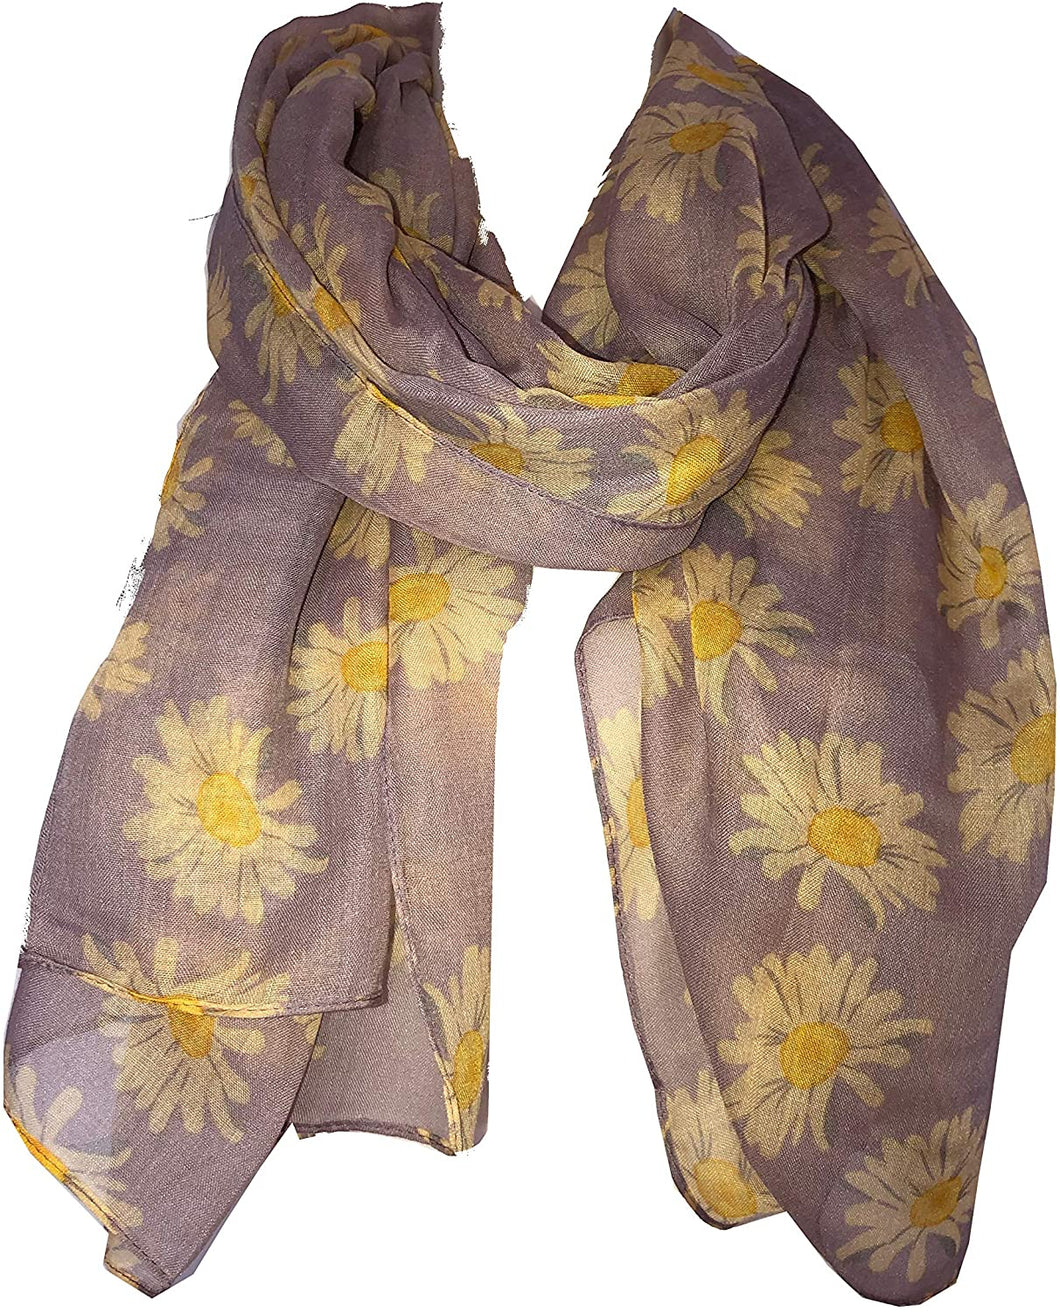 Pamper Yourself Now Lilac Daisy Scarf Lovely Soft Scarf